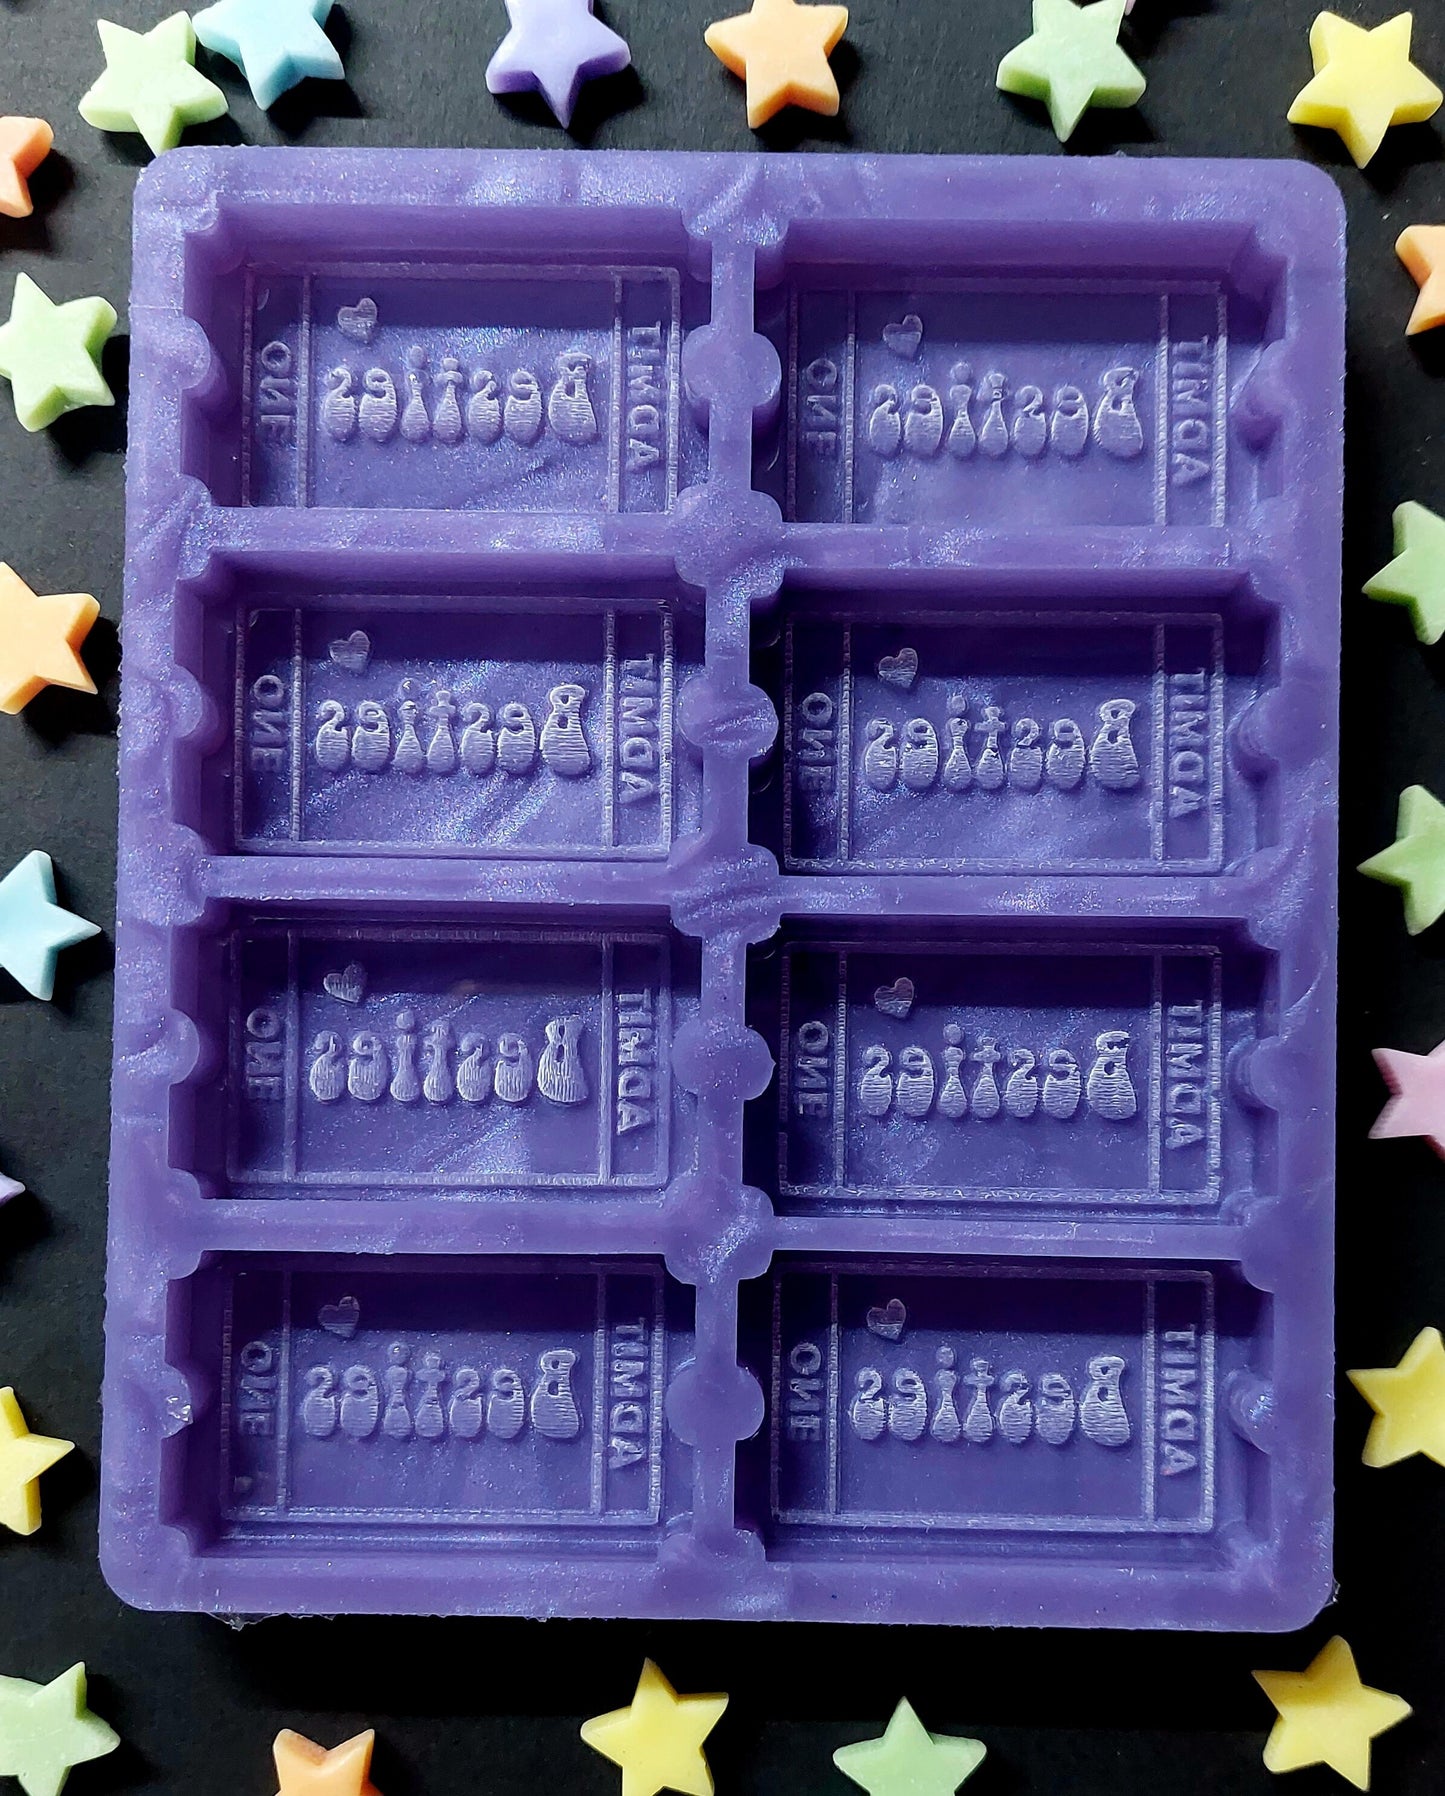 Besties 8 Cell Ticket Silicone Mould for wax, resin, soap etc